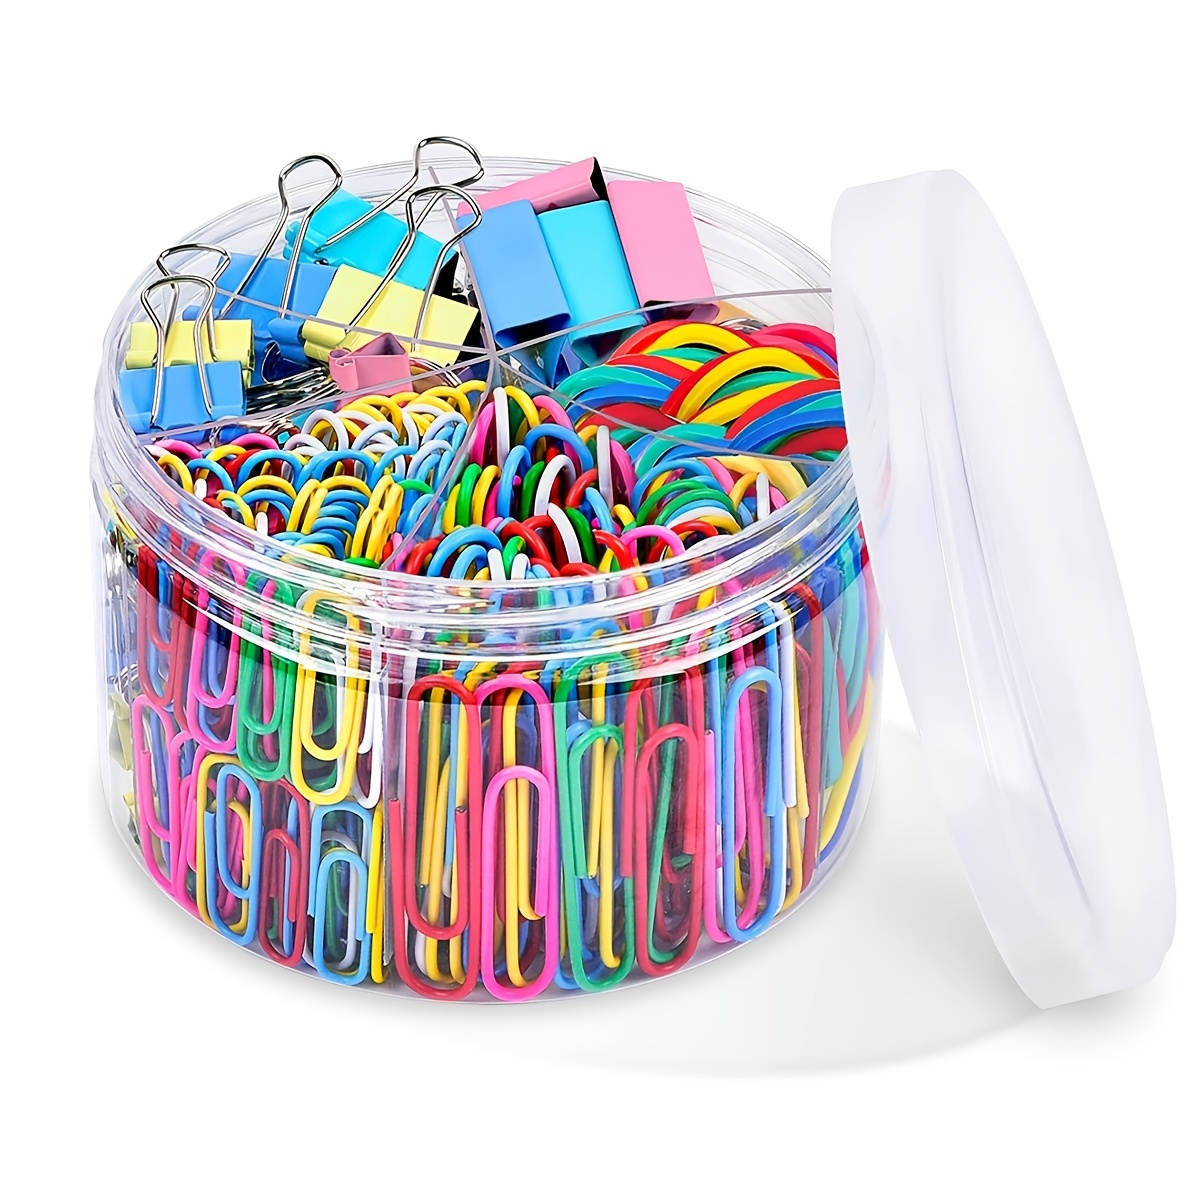 

240pcs Paper Clips Binder Clips, Colored Office Clips Set - Assorted Sizes Paperclips Paper Clamps Rubber Bands For Office And School Supplies, Document Organizing